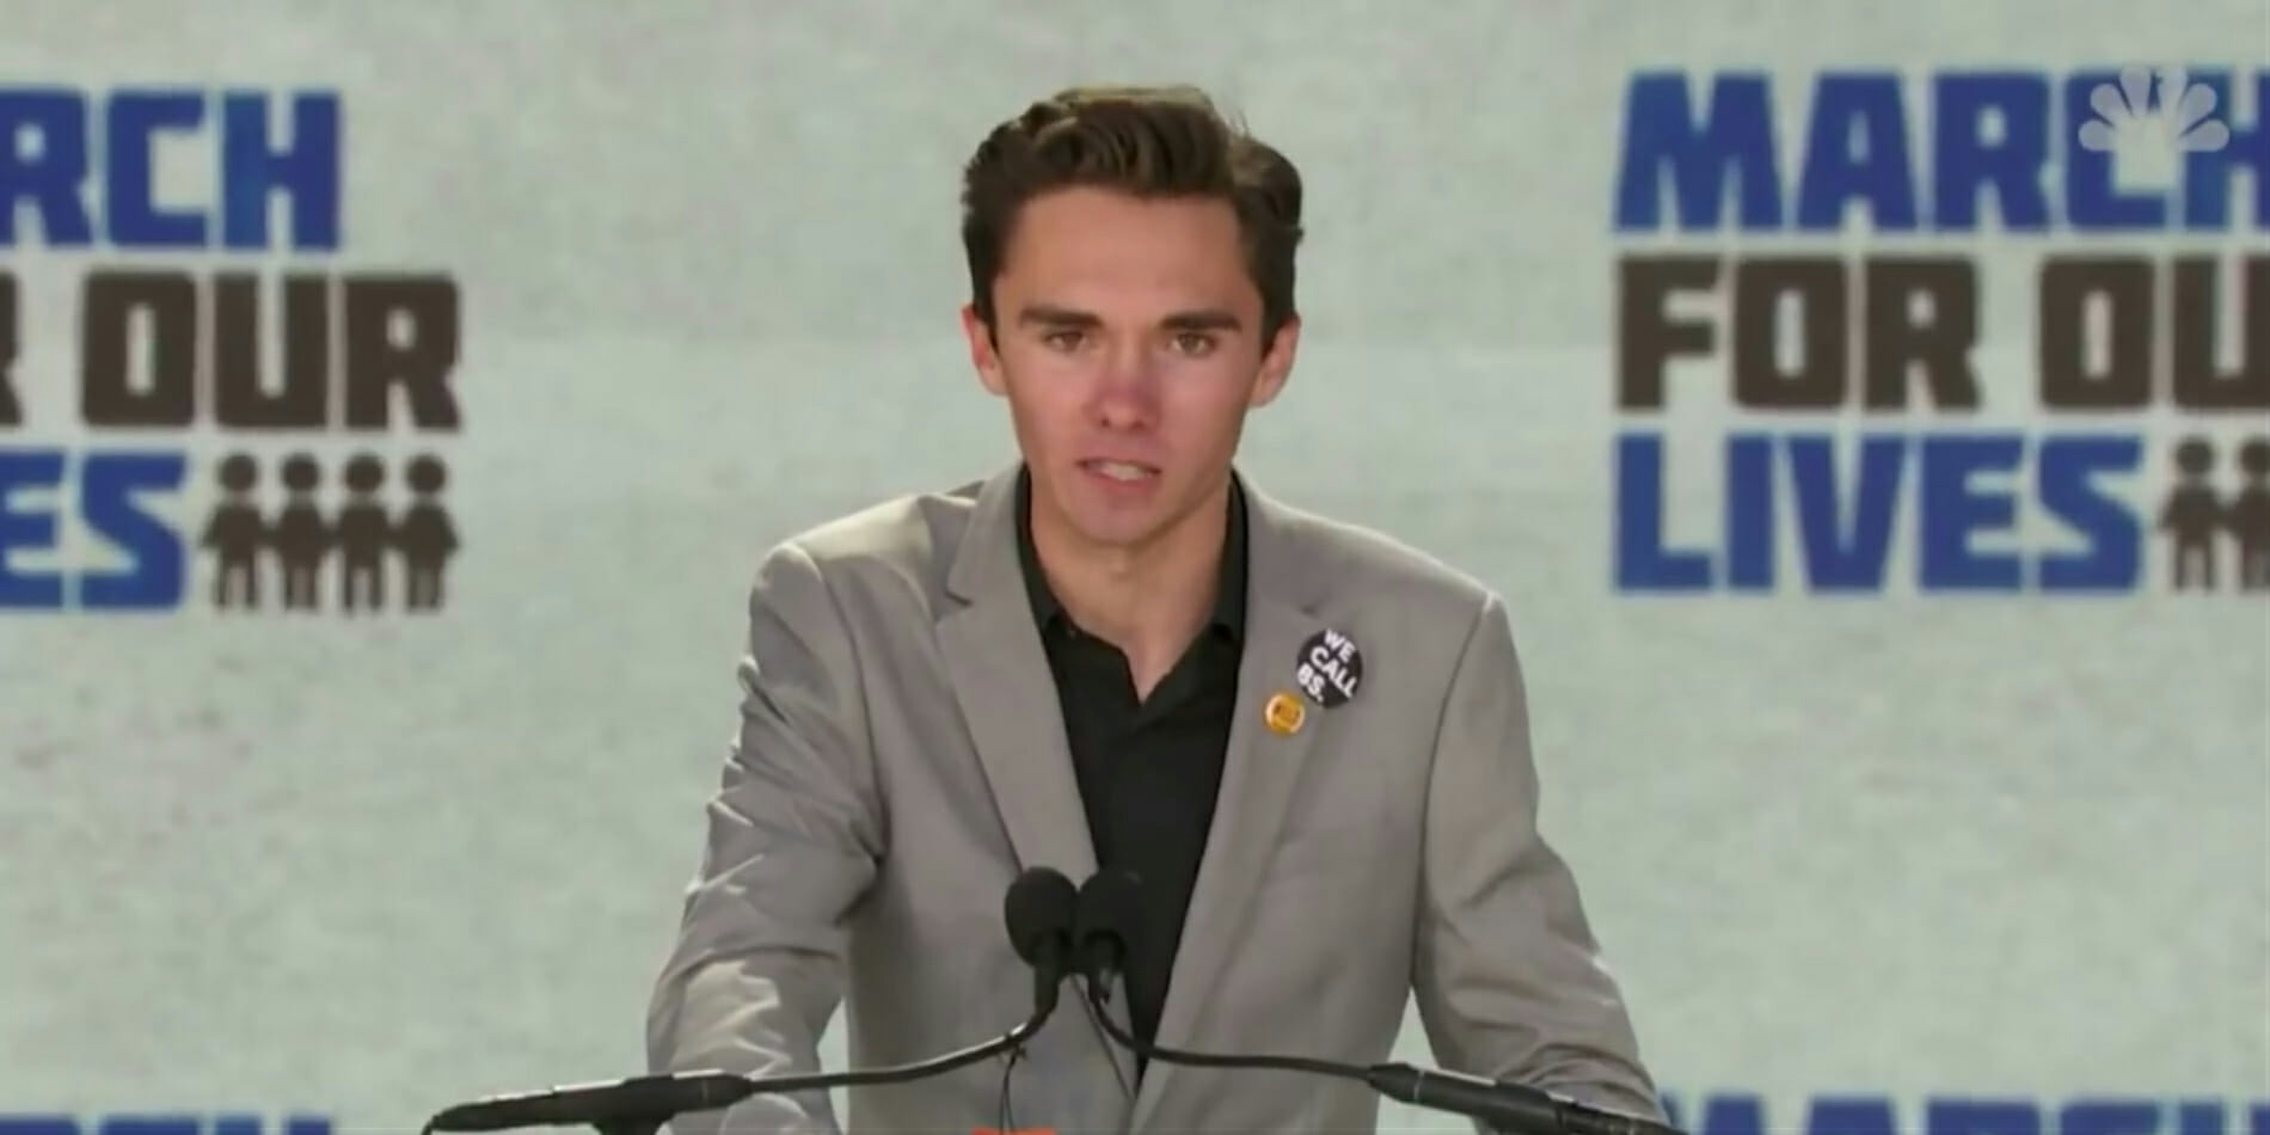 Laura Ingraham attacked David Hogg over Twitter by targeting his college rejections.